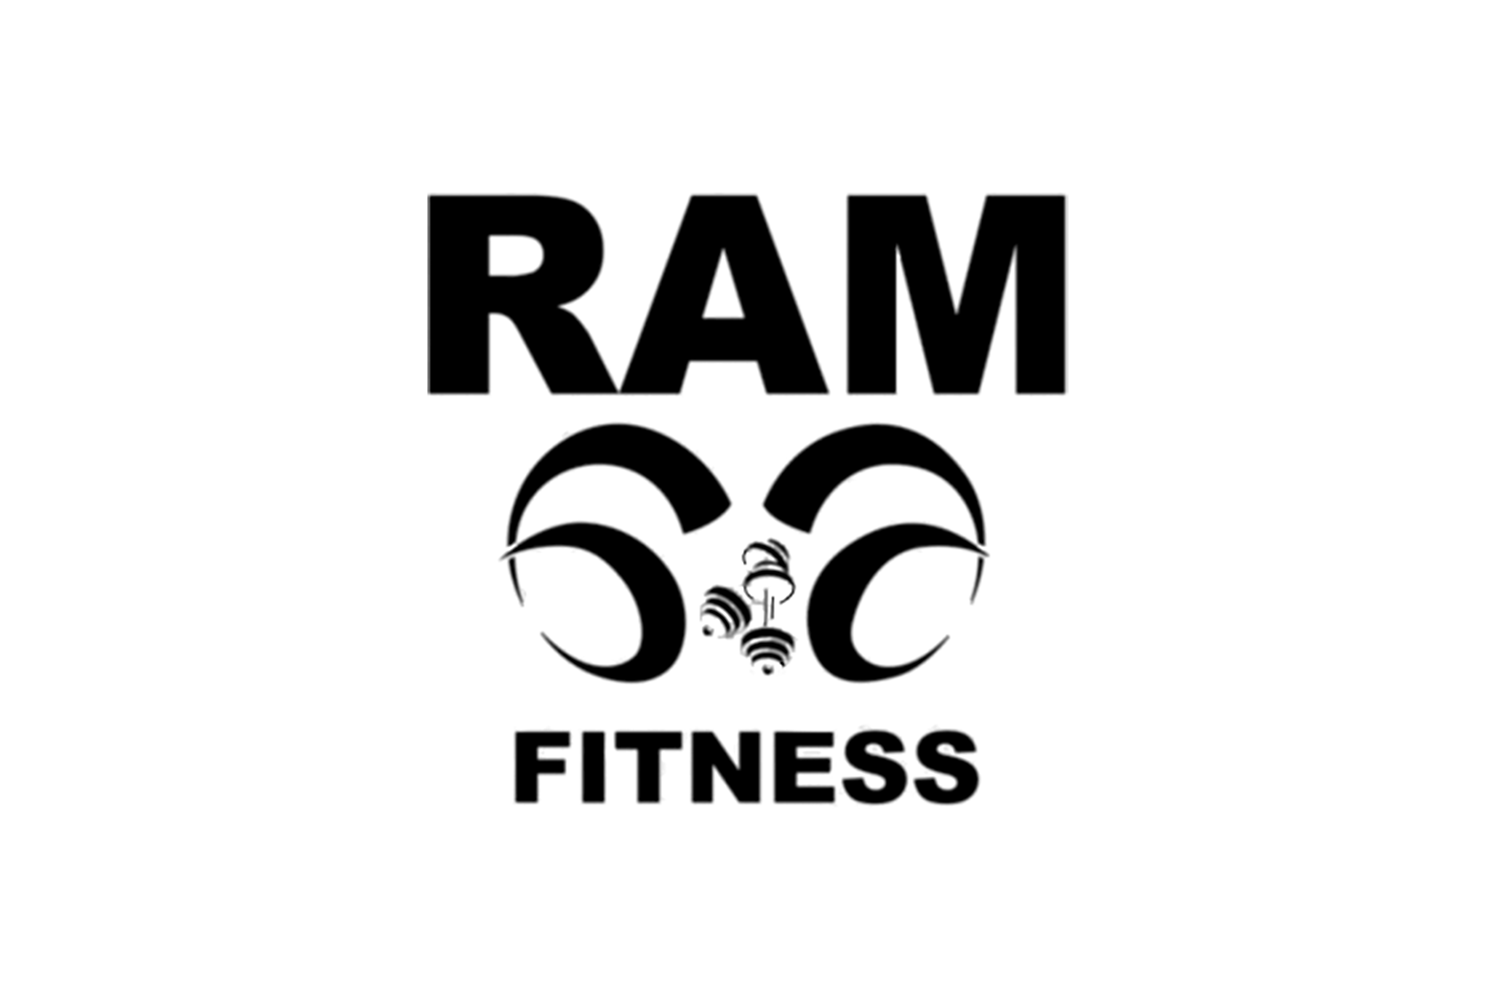 The official logo of Ram Fitness of East Liverpool, Ohio.